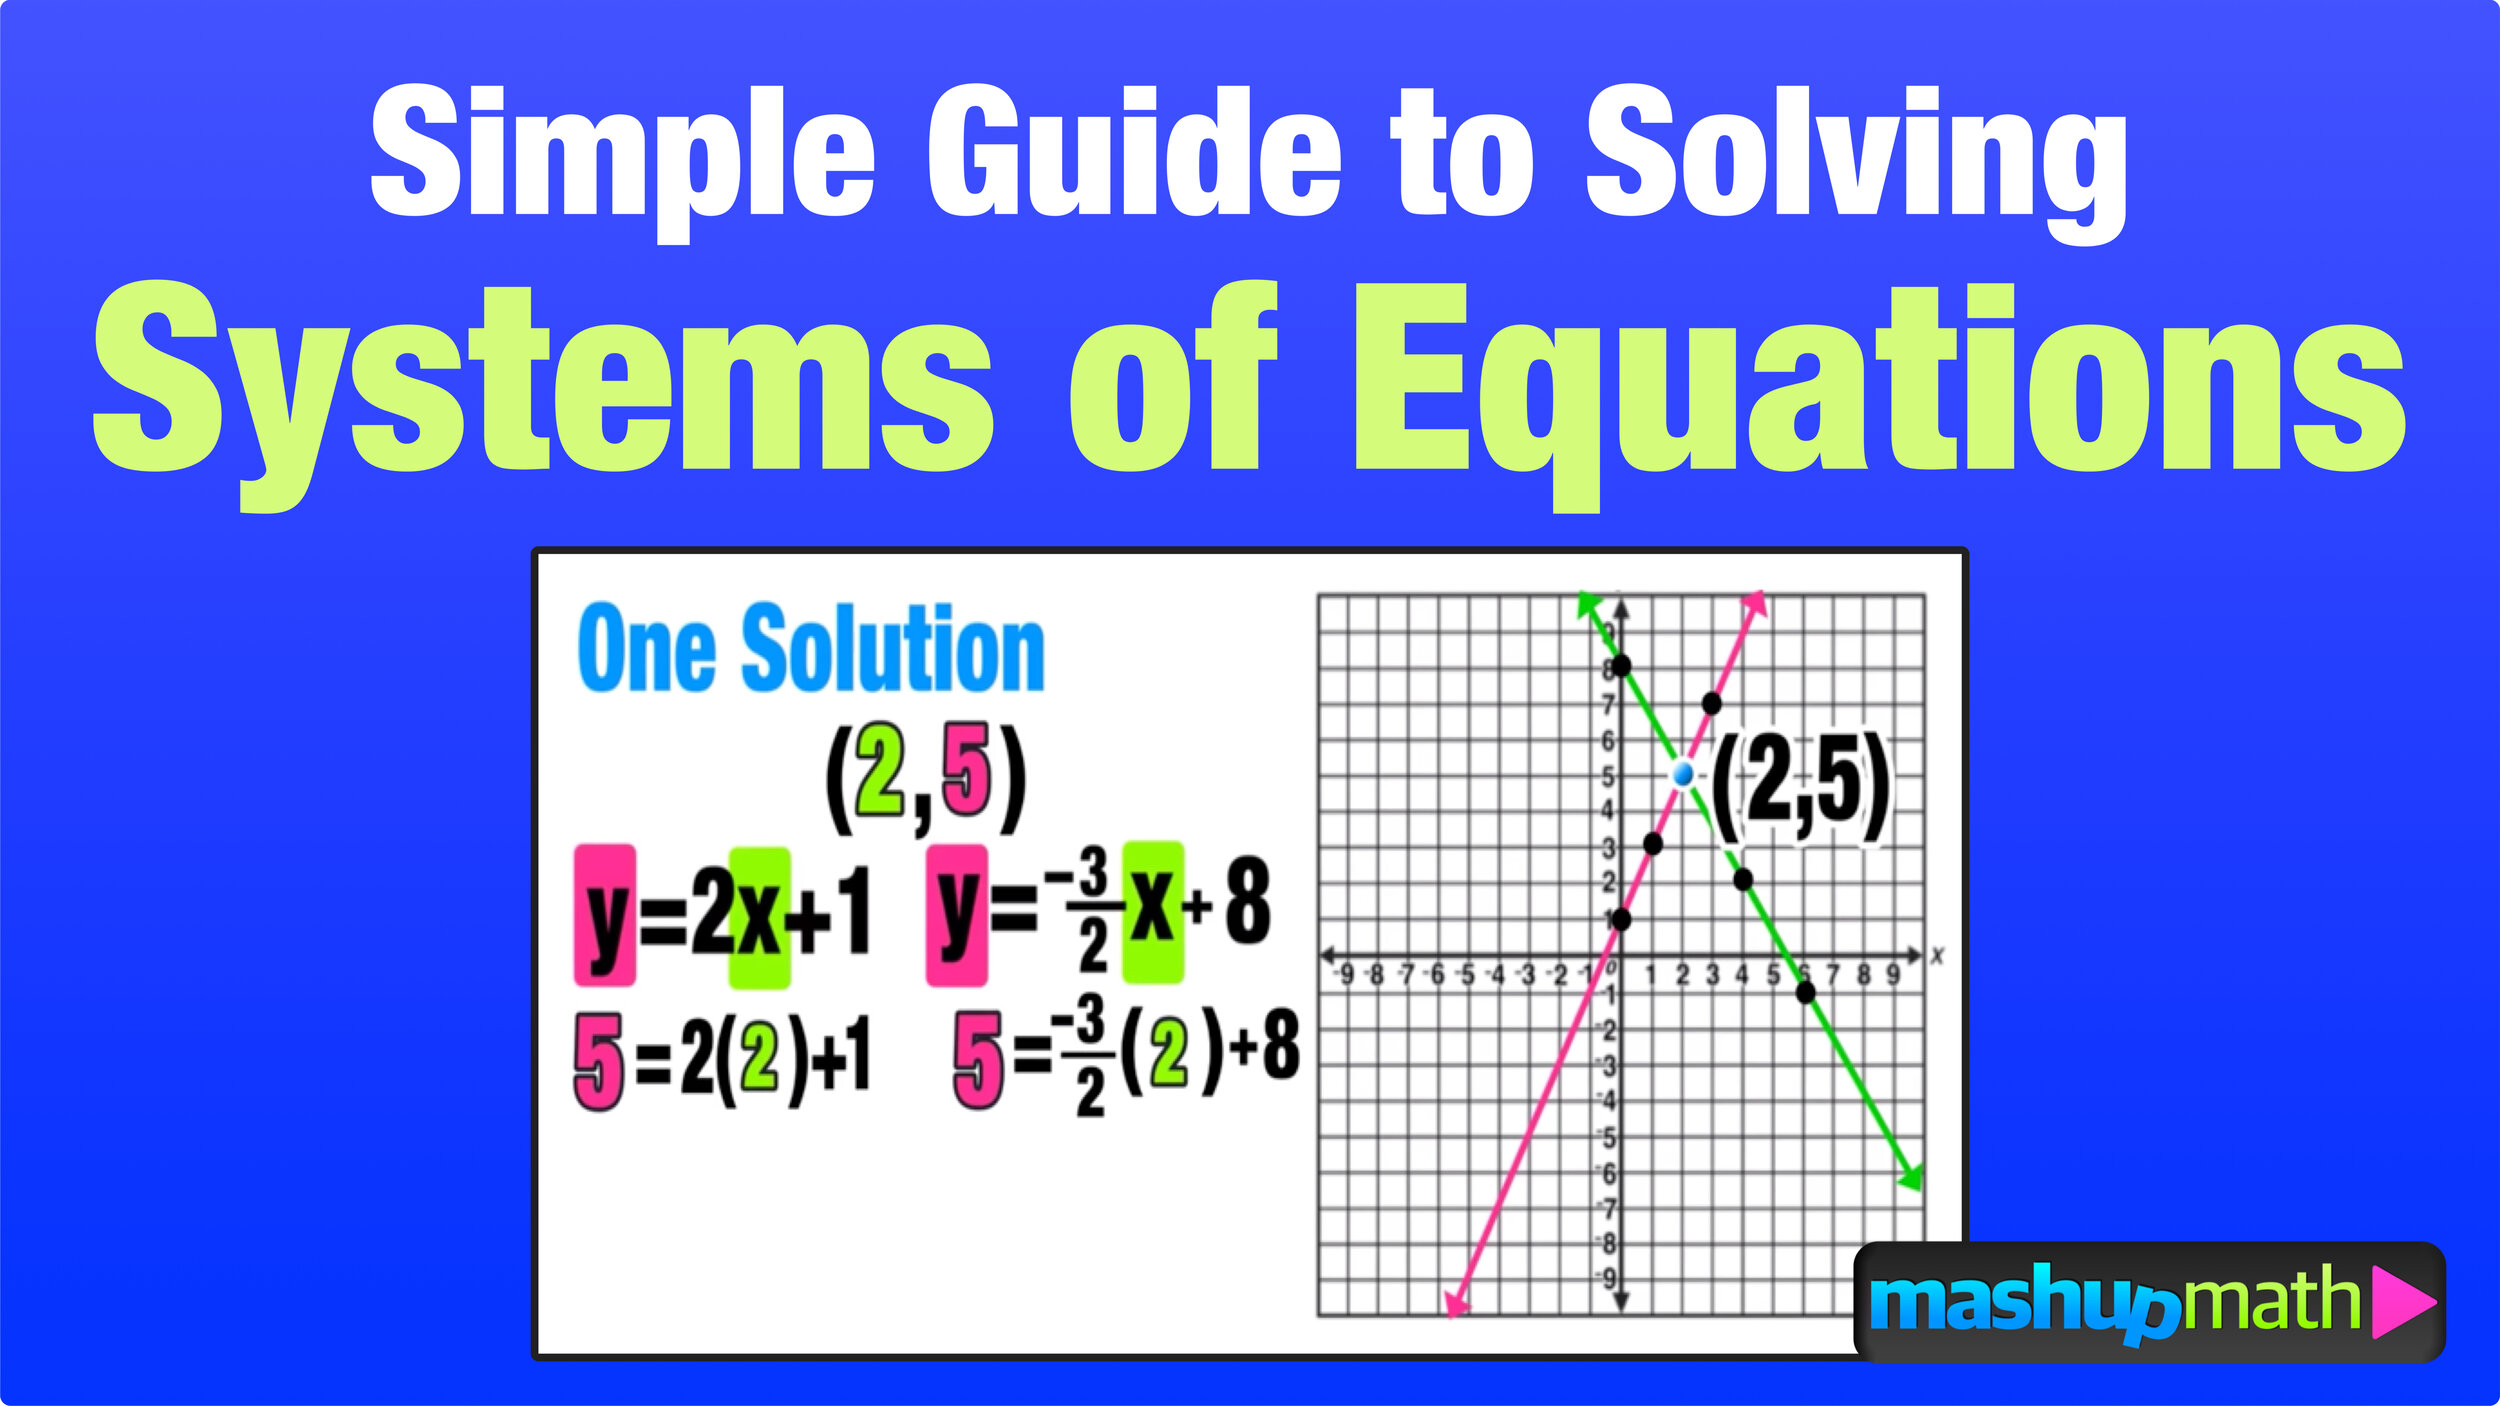 Solving Systems of Equations Explained! — Mashup Math Pertaining To Systems Of Equations Worksheet Pdf